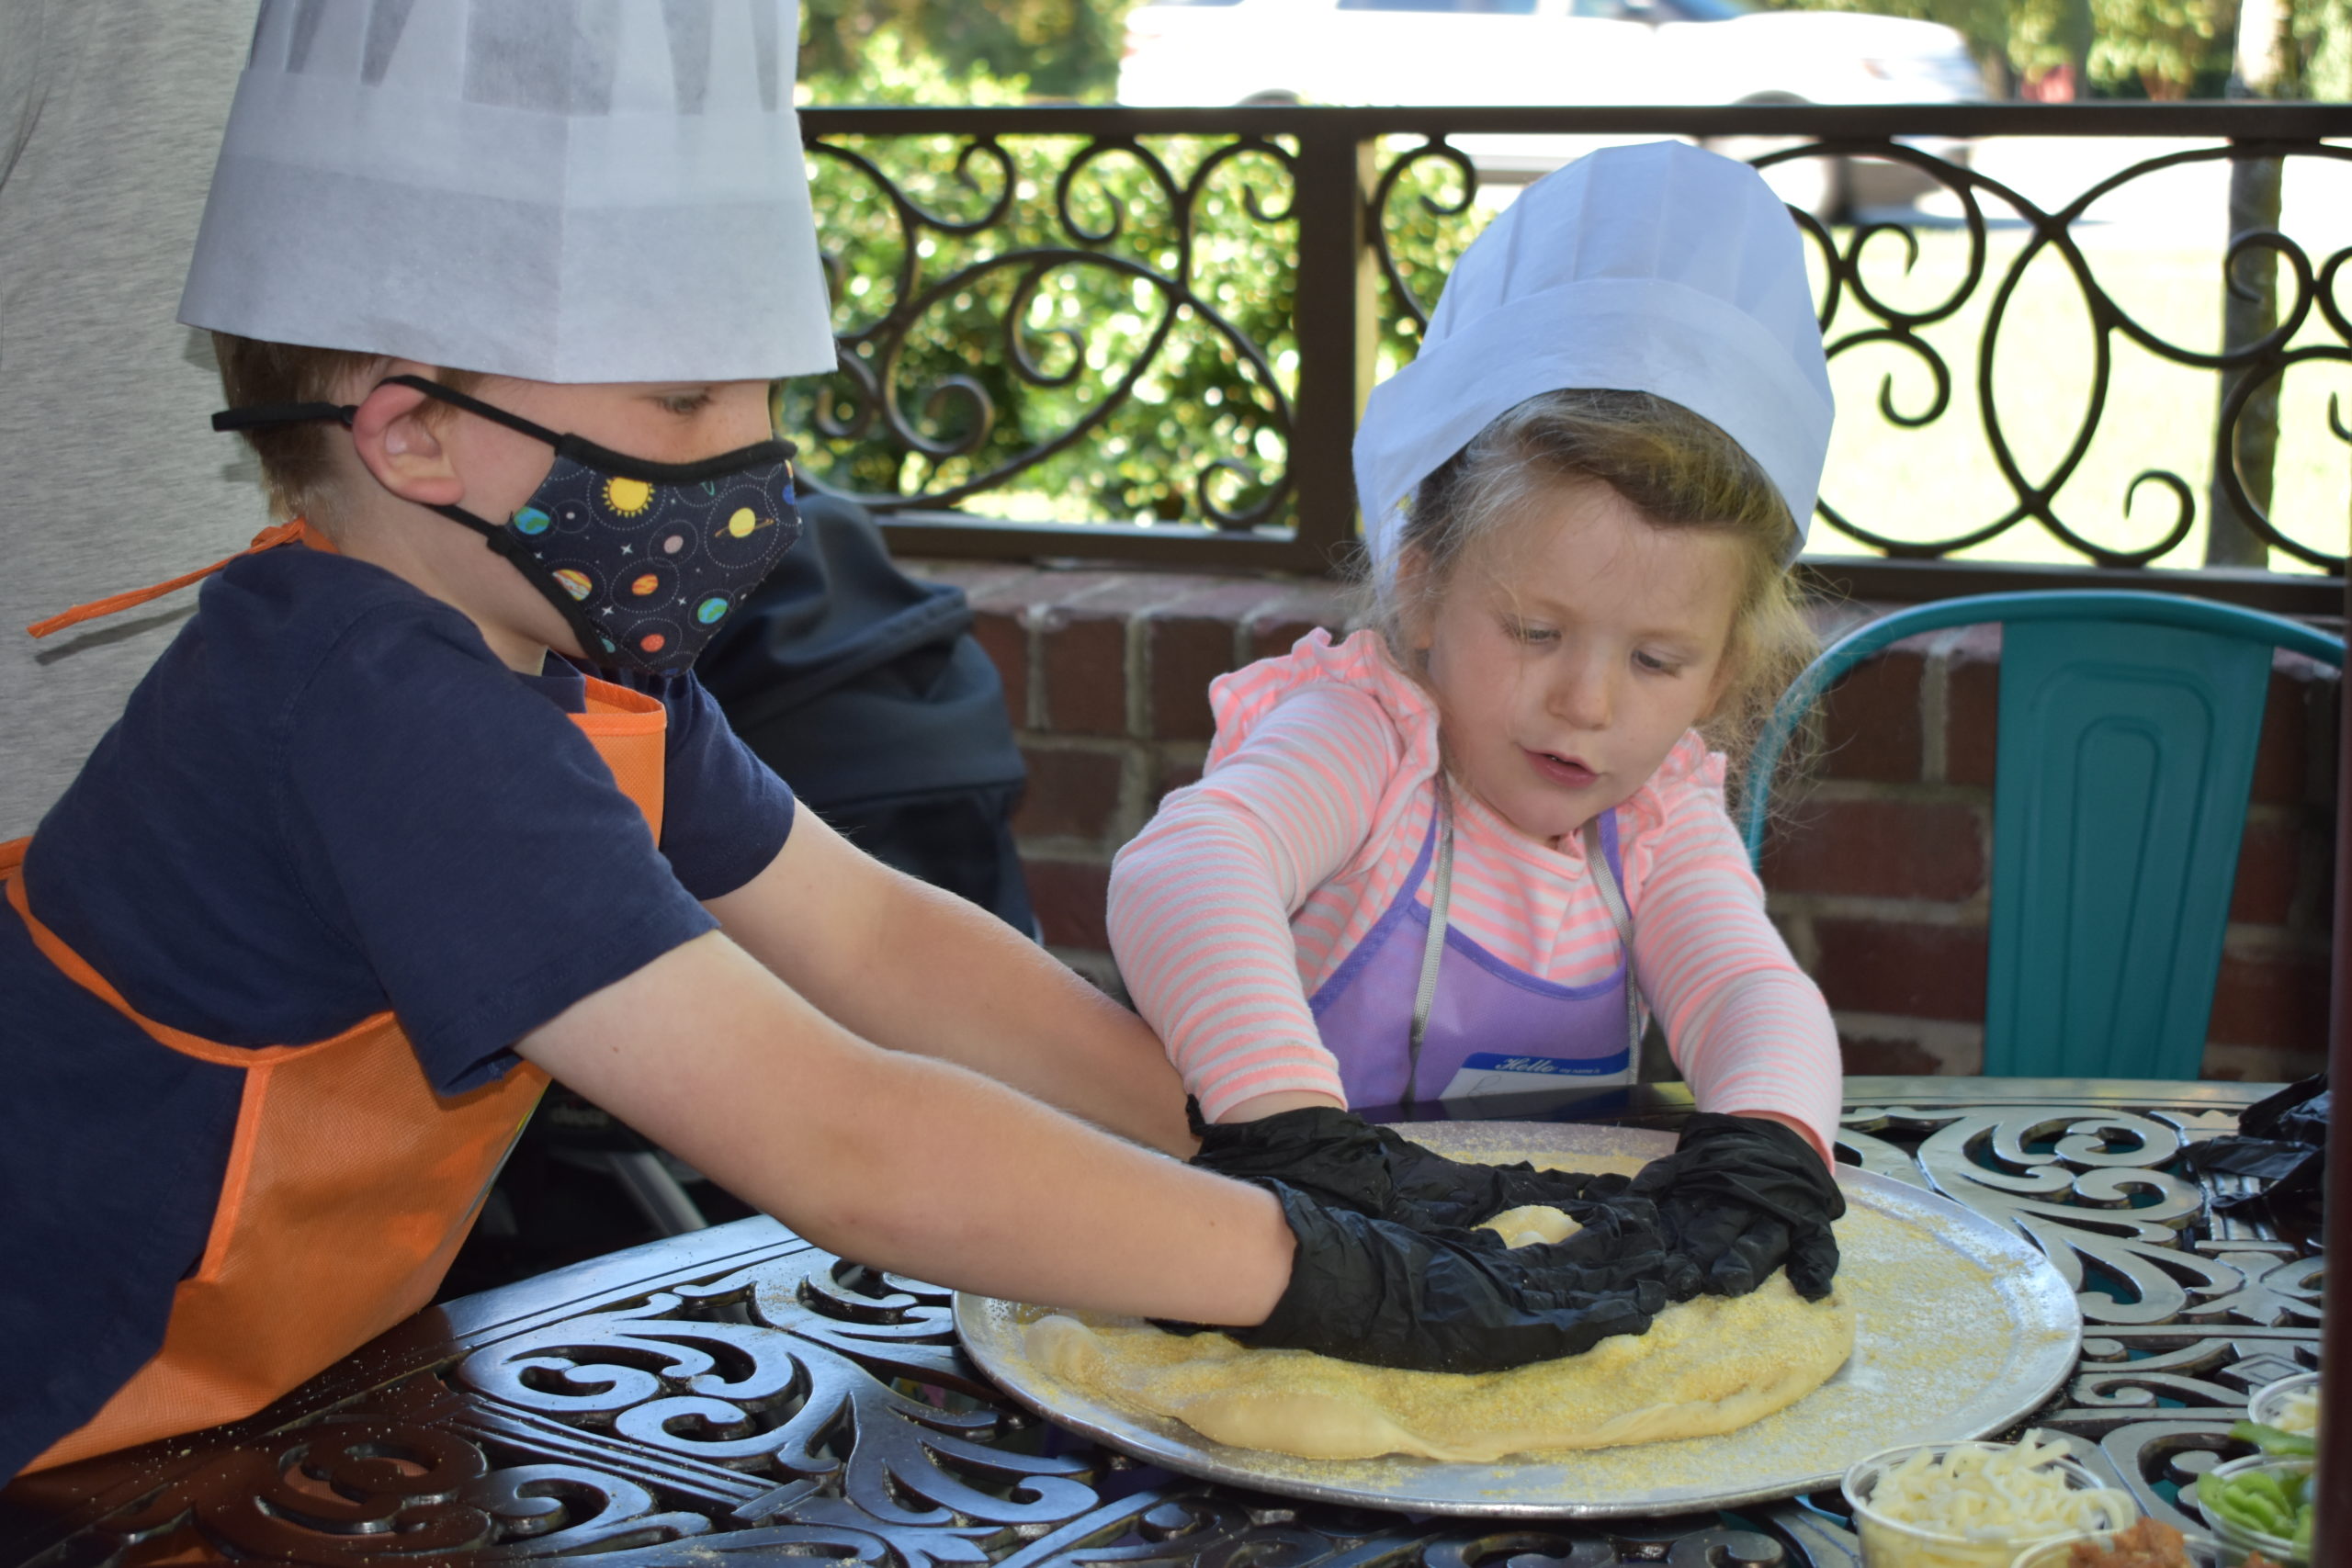 Image two children rolling pizza dough